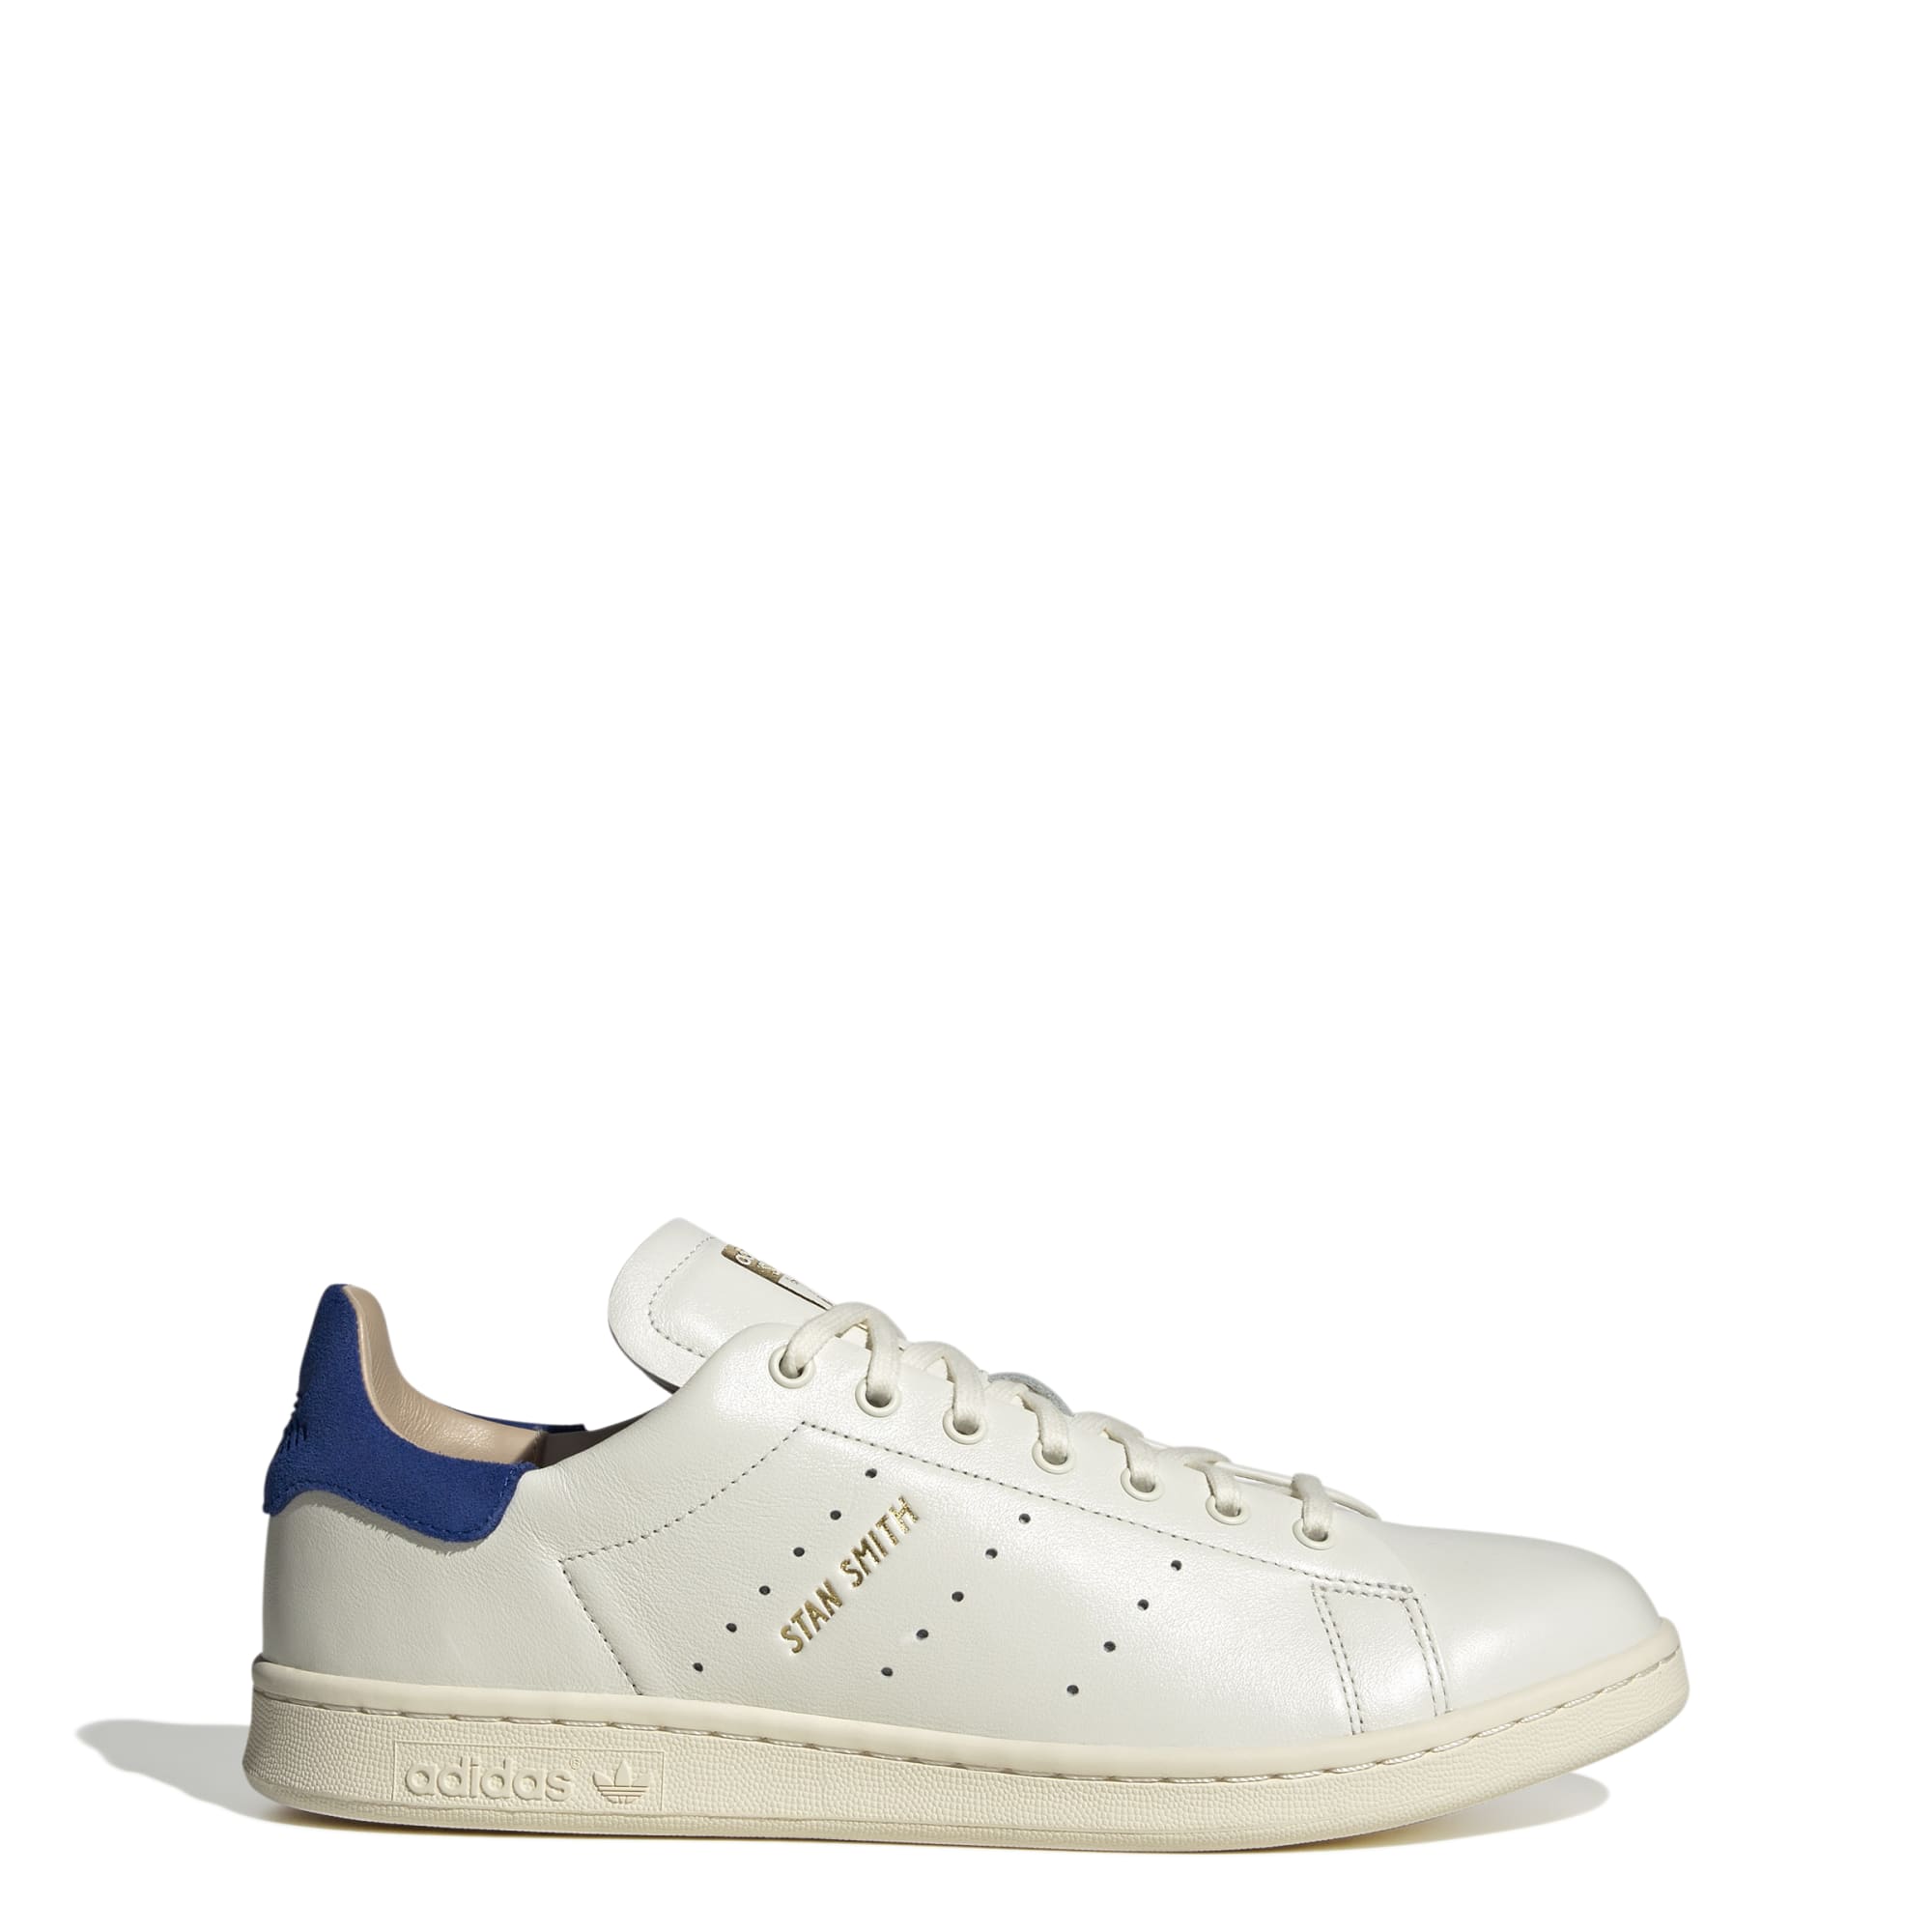 ADIDAS STAN SMITH LUX ID1995 SNEAKER (M)-2